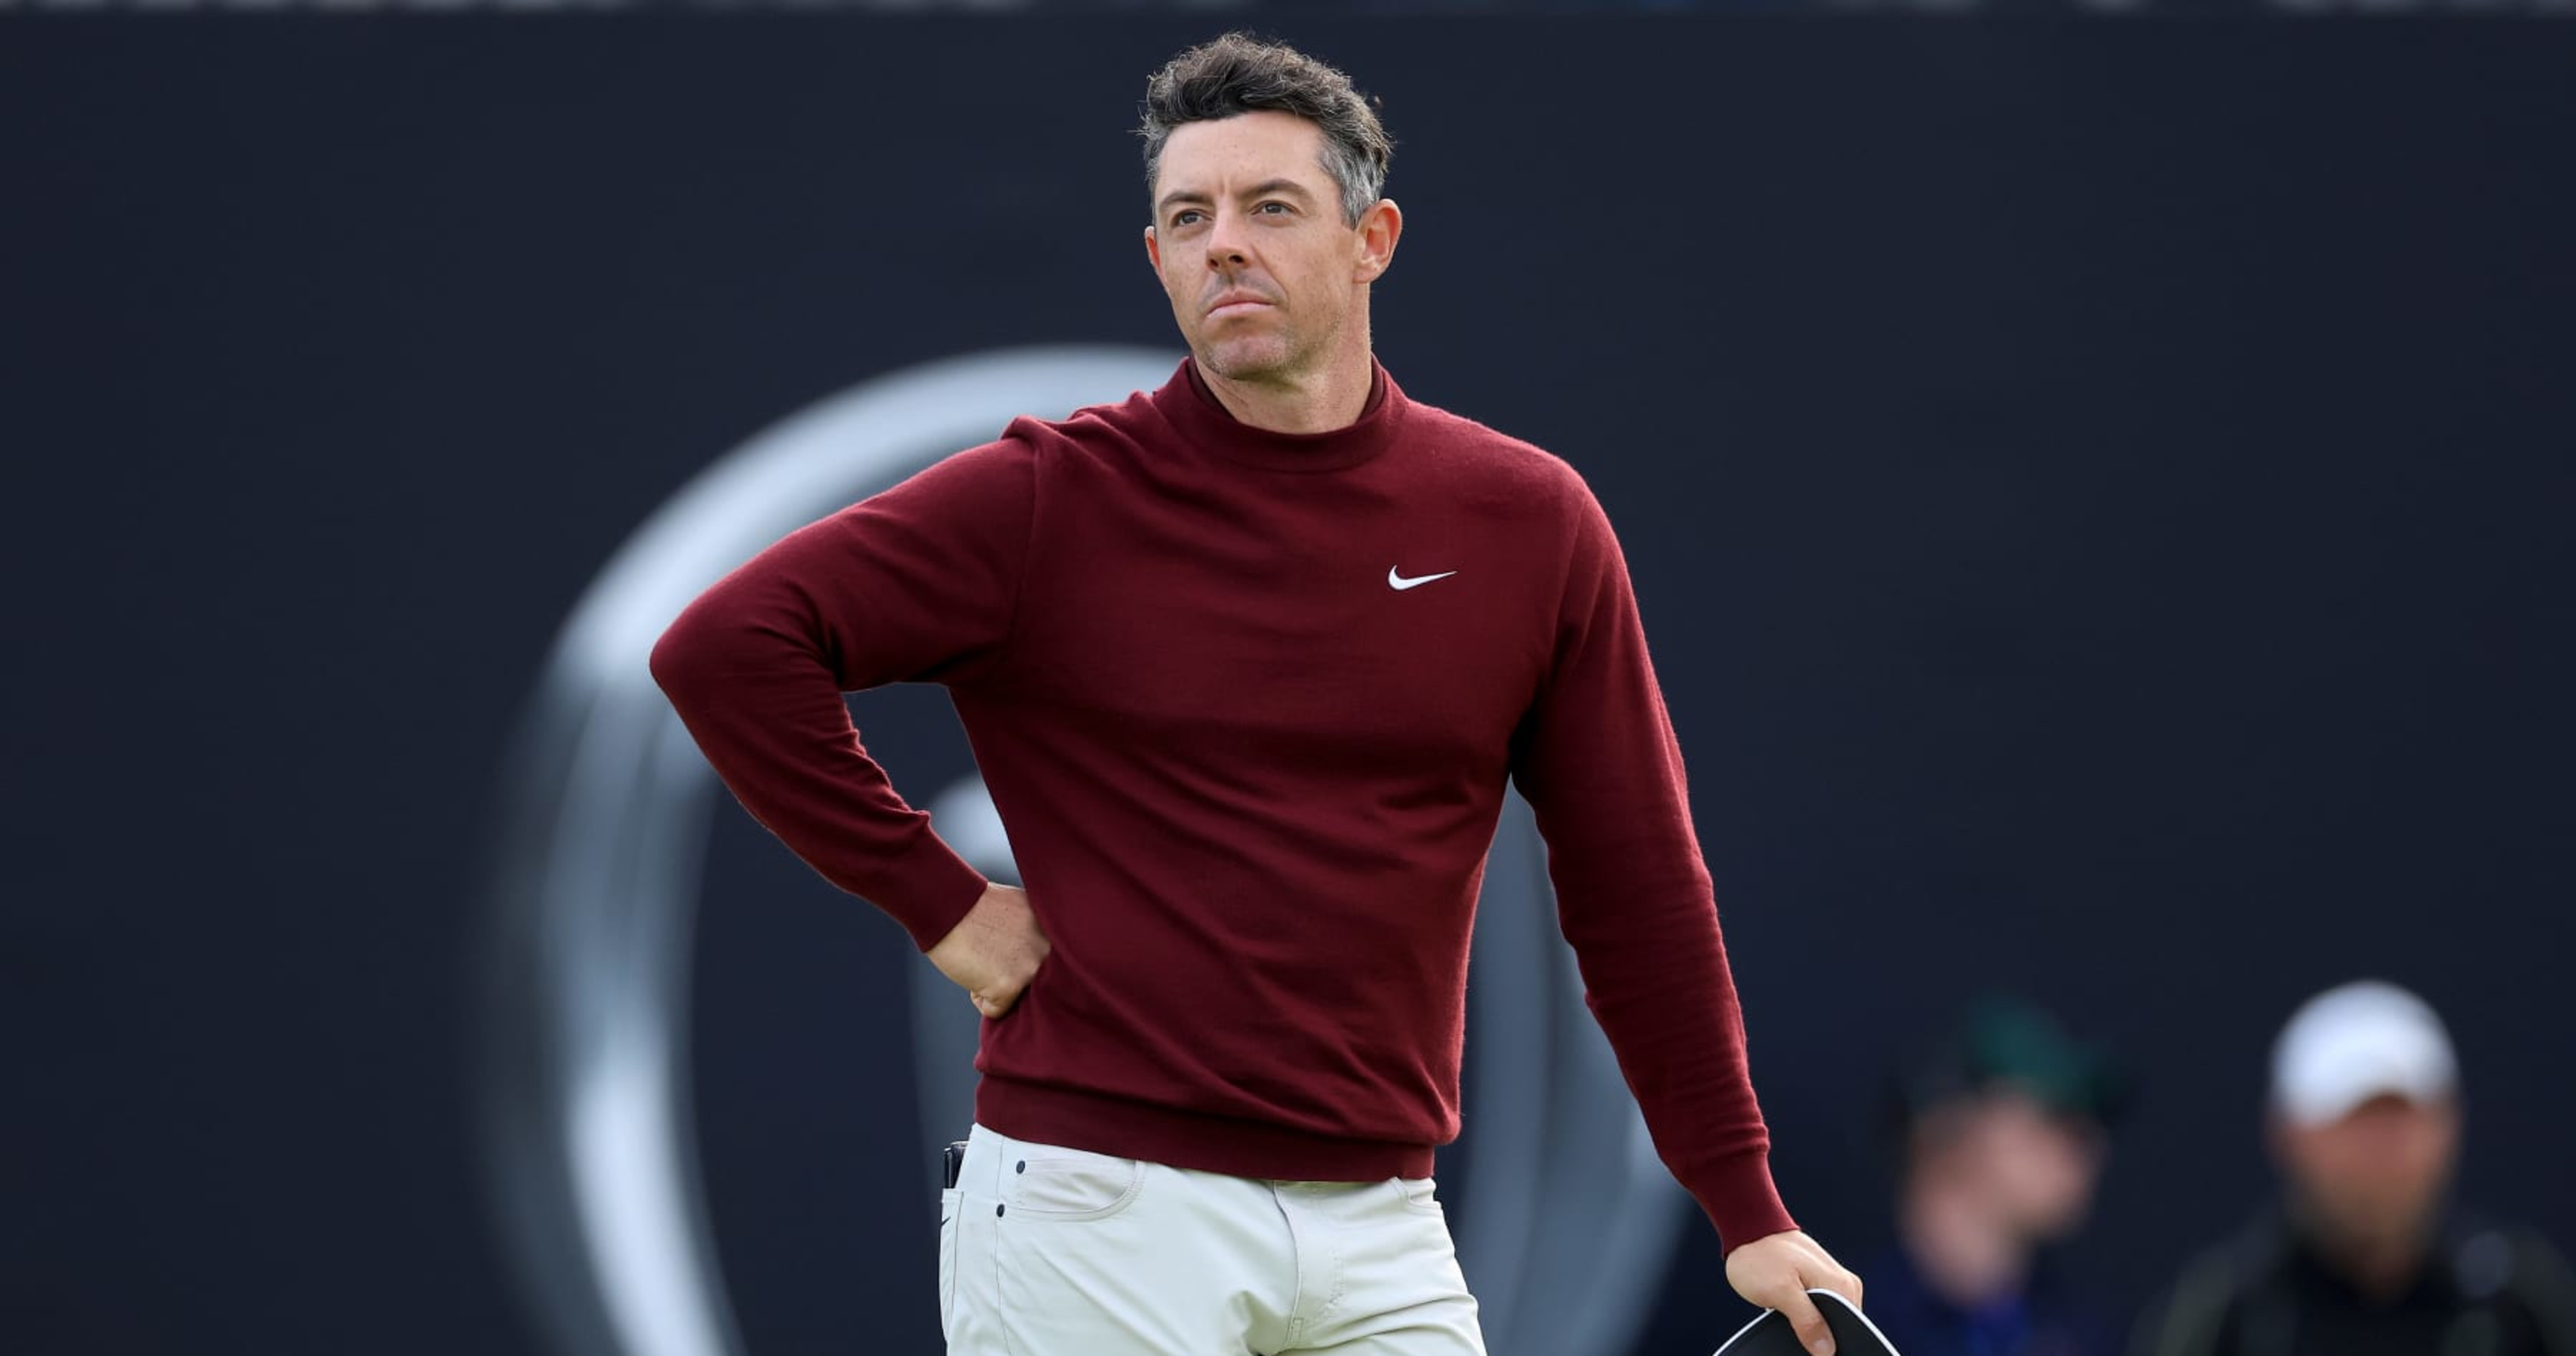 Rory McIlroy: There's 'Things Left to Play for' After Missing 2024 British Open Cut